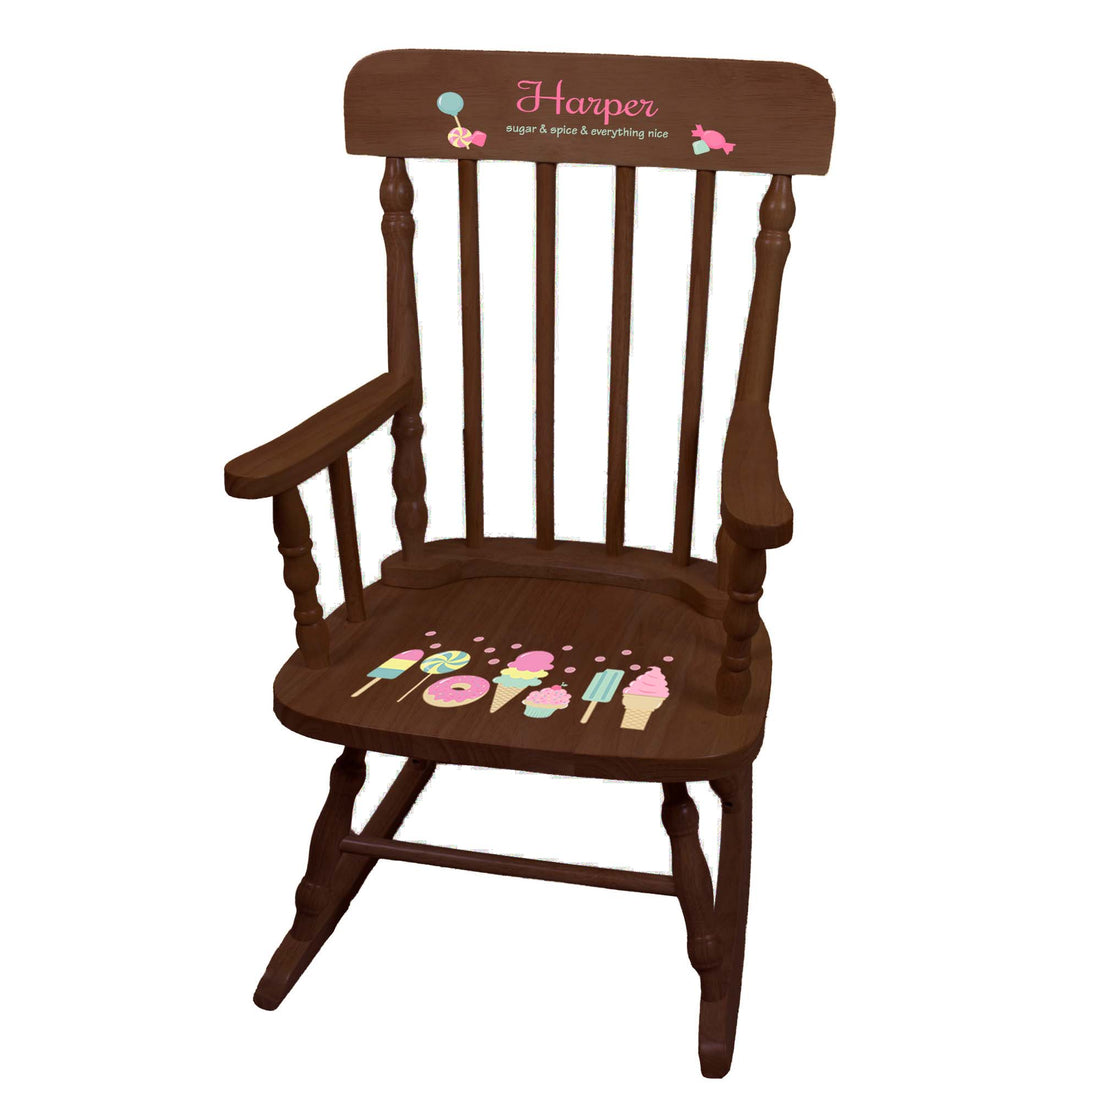 Kid's Sweet Treat Spindle Rocking Chair - Espresso